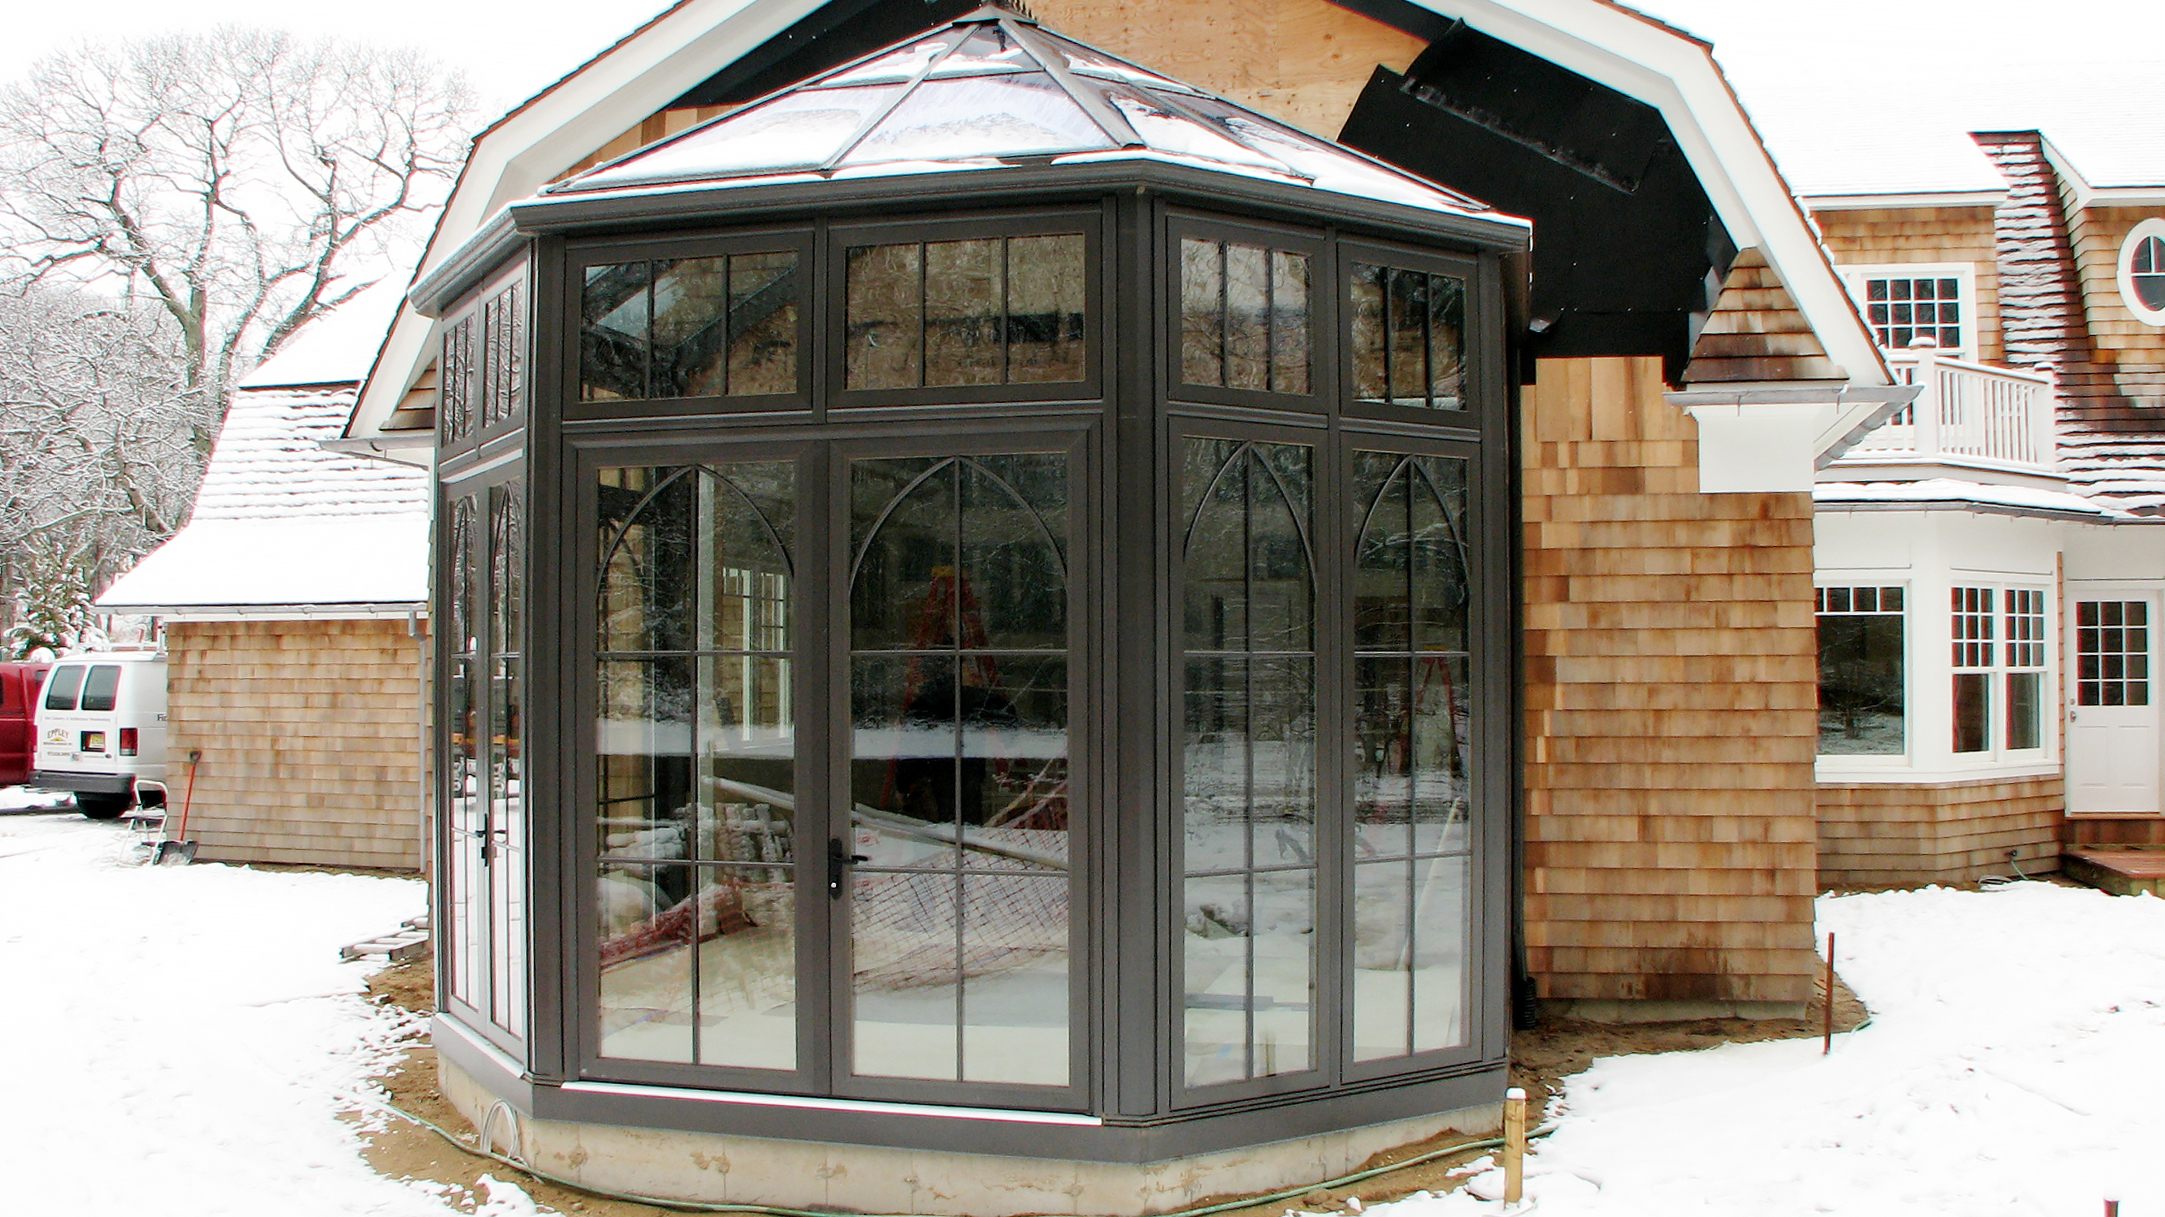 Straight eave double pitch pool enclosure with one conservatory nose, French doors, ridge vents, gridwork, gutter and downspout.